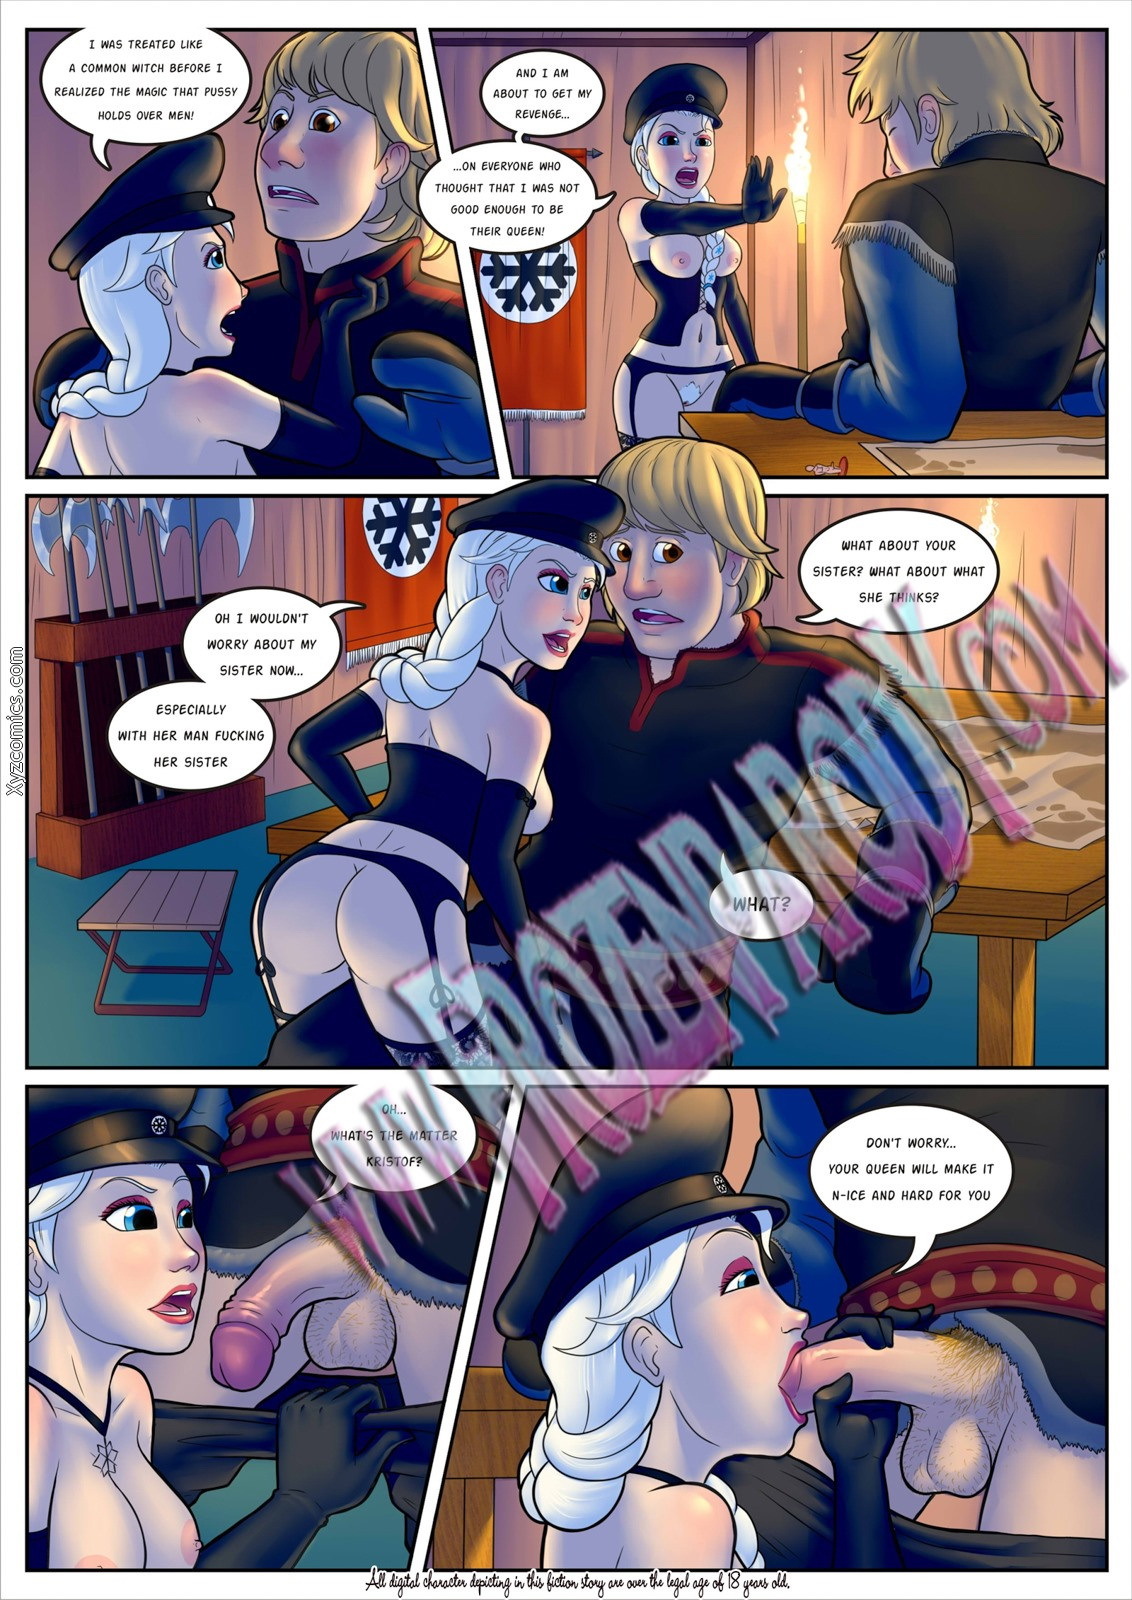 Frozen Parody 1, 2 - Page 15